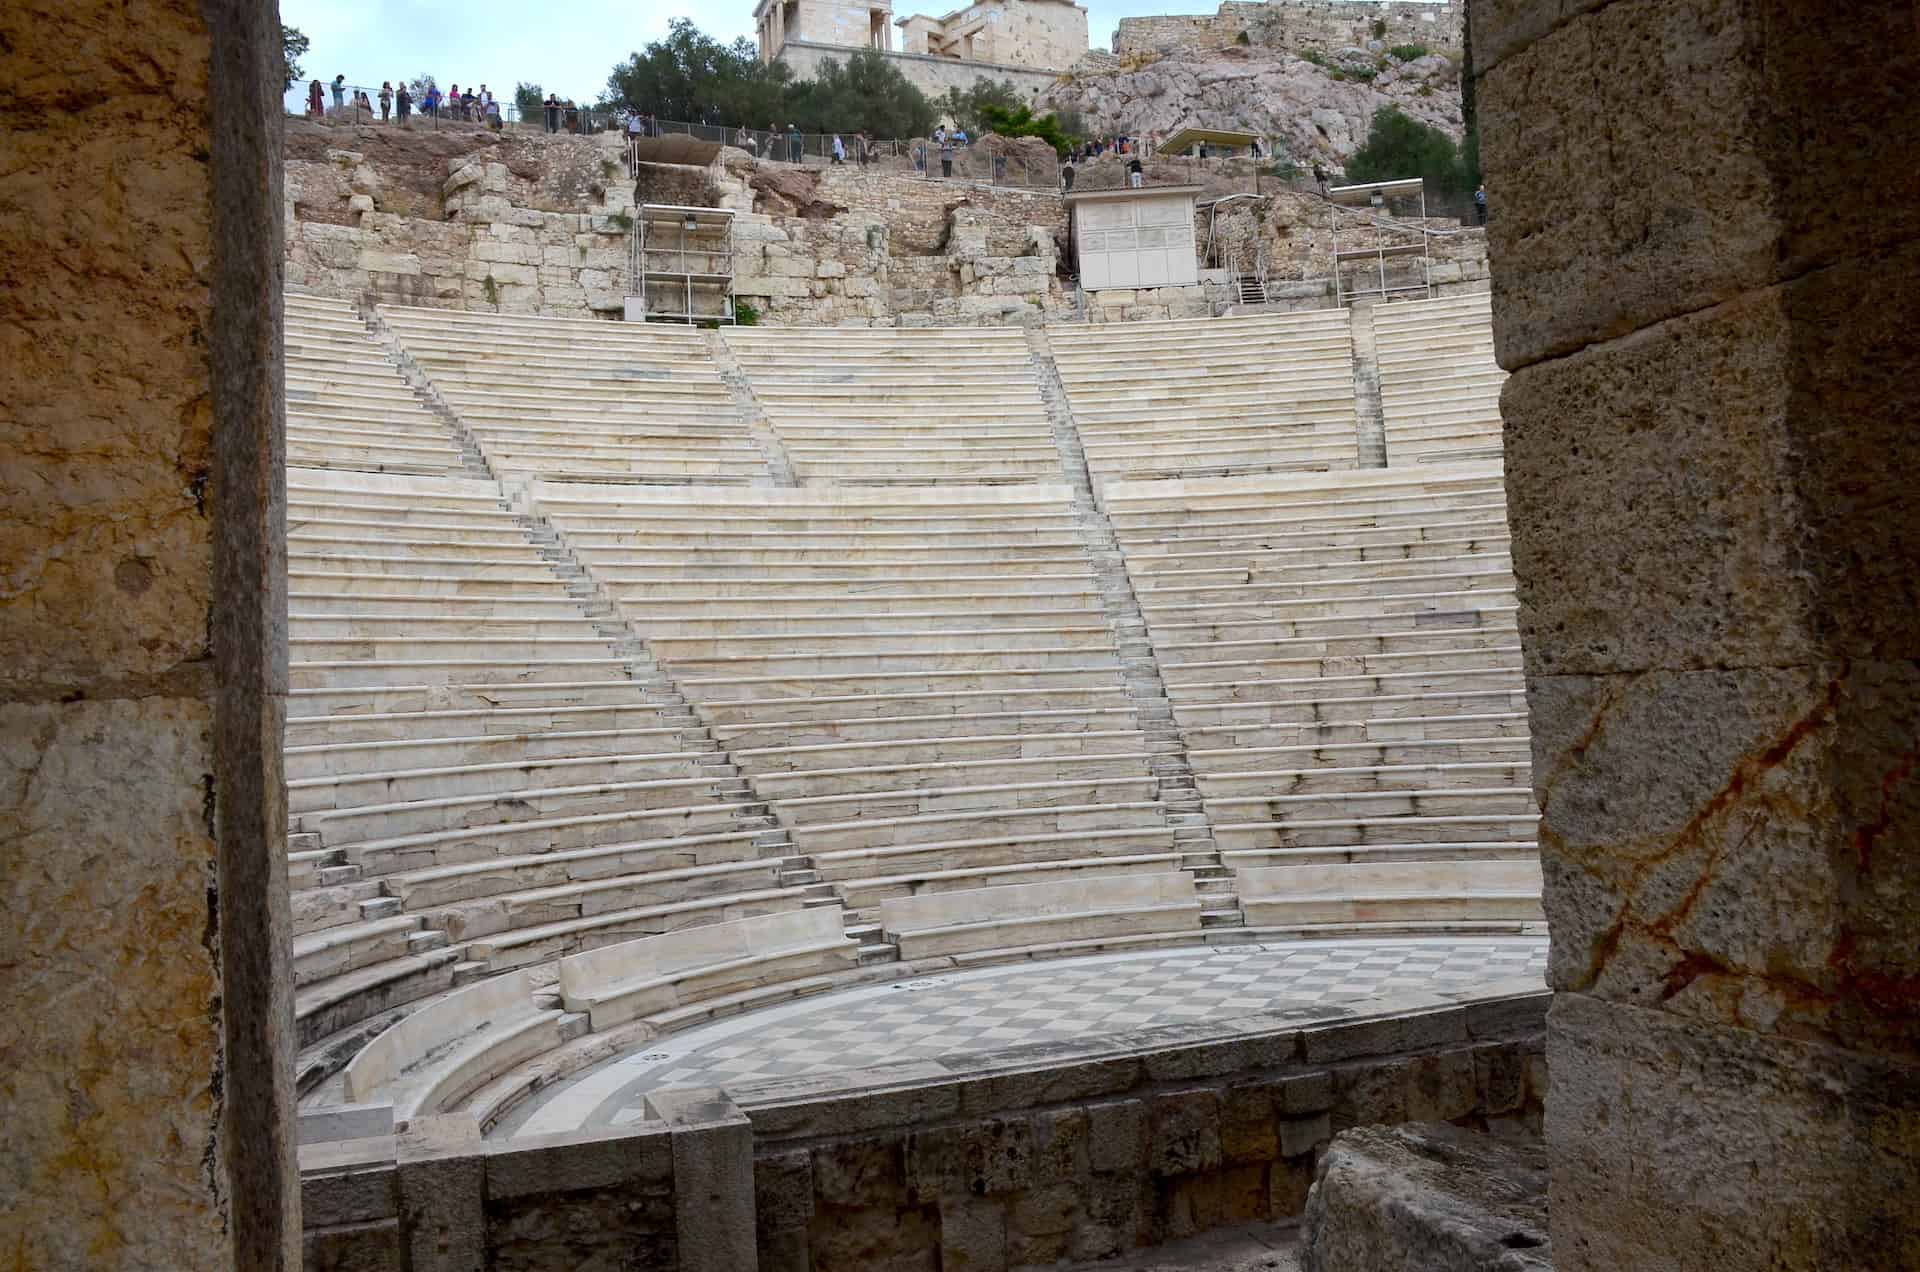 Seats of the Odeon of Herodes Atticus